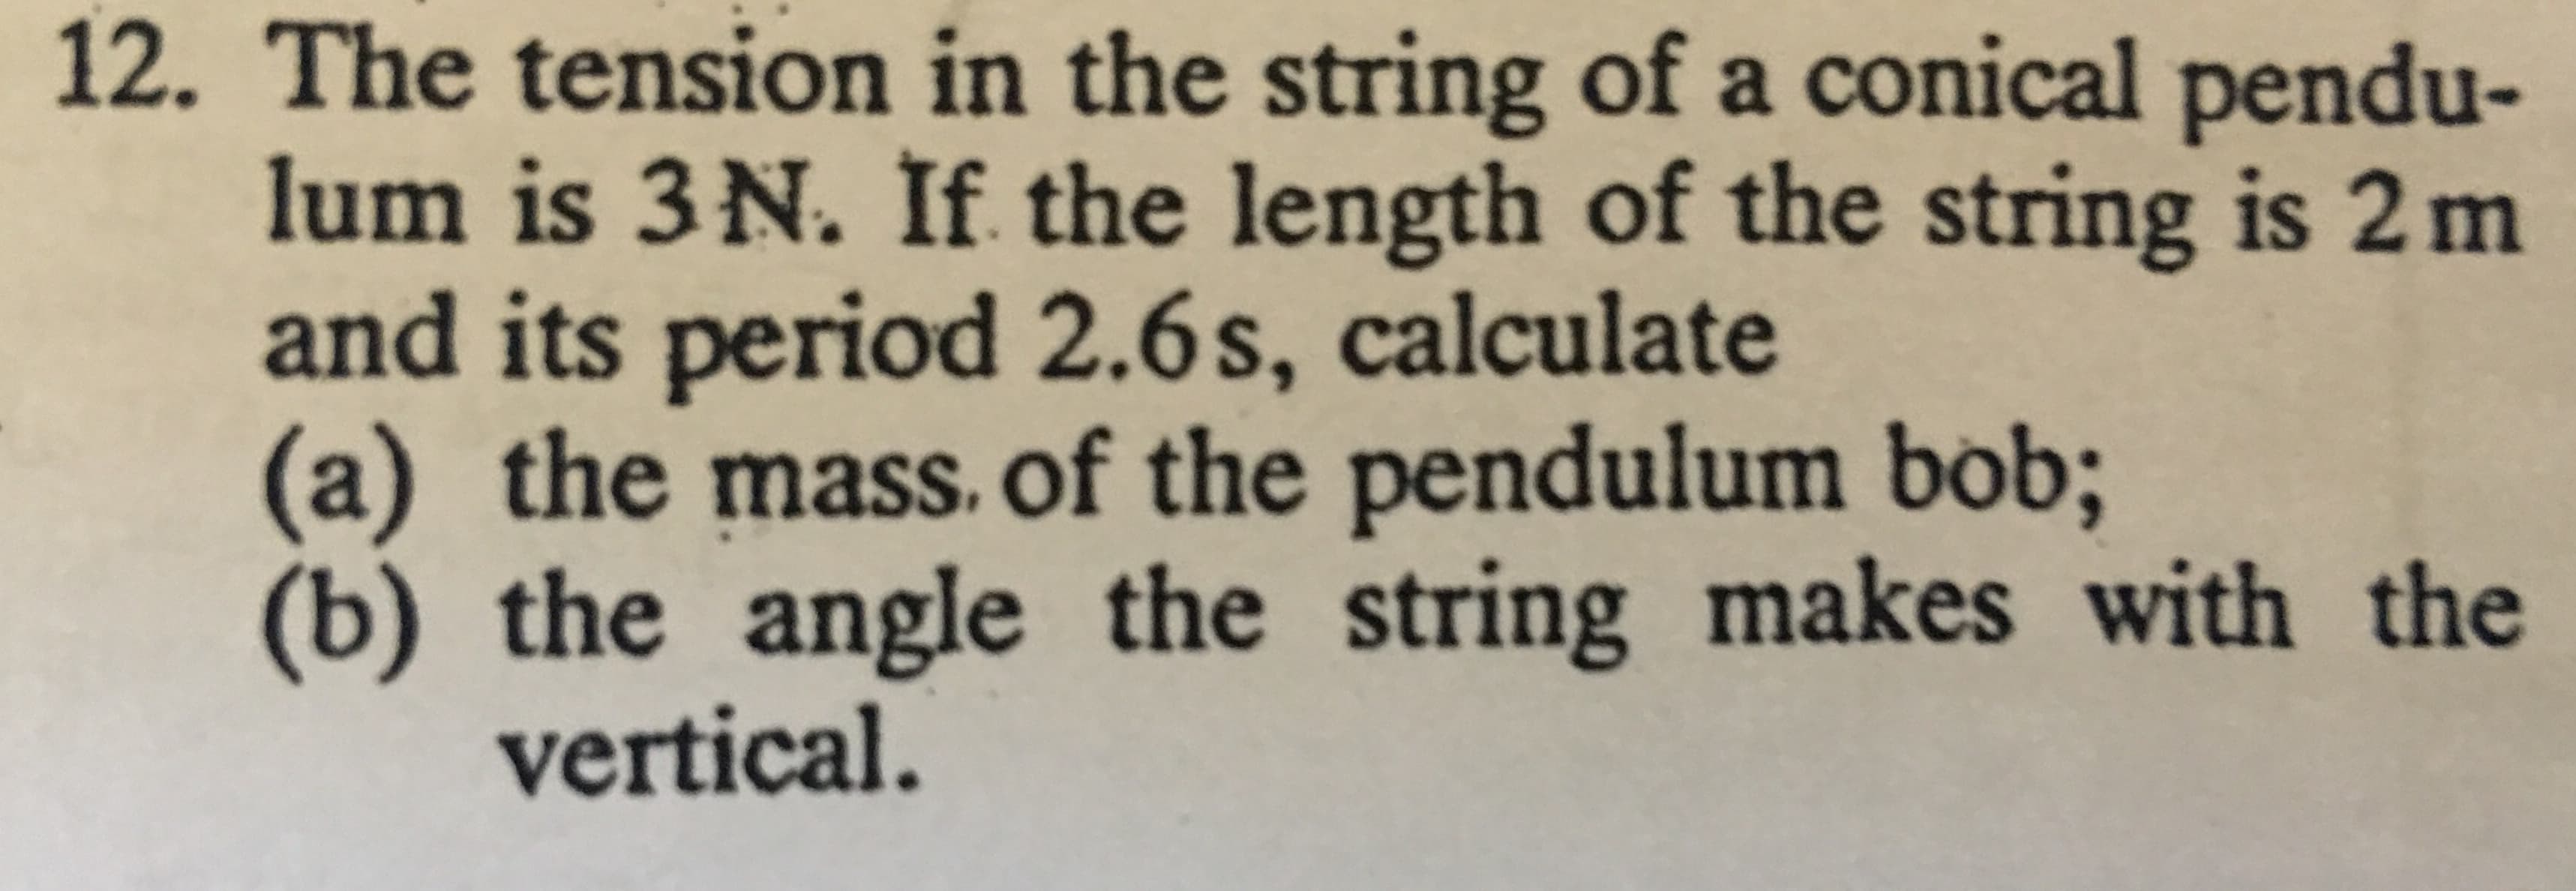 The tension in the string of a conical pendu-
lum is 3 N. If the length of the string is 2m
and its period 2.6s, calculate
(a) the mass. of the pendulum bob;
) the
vertical.
12.
angle the string makes with the
